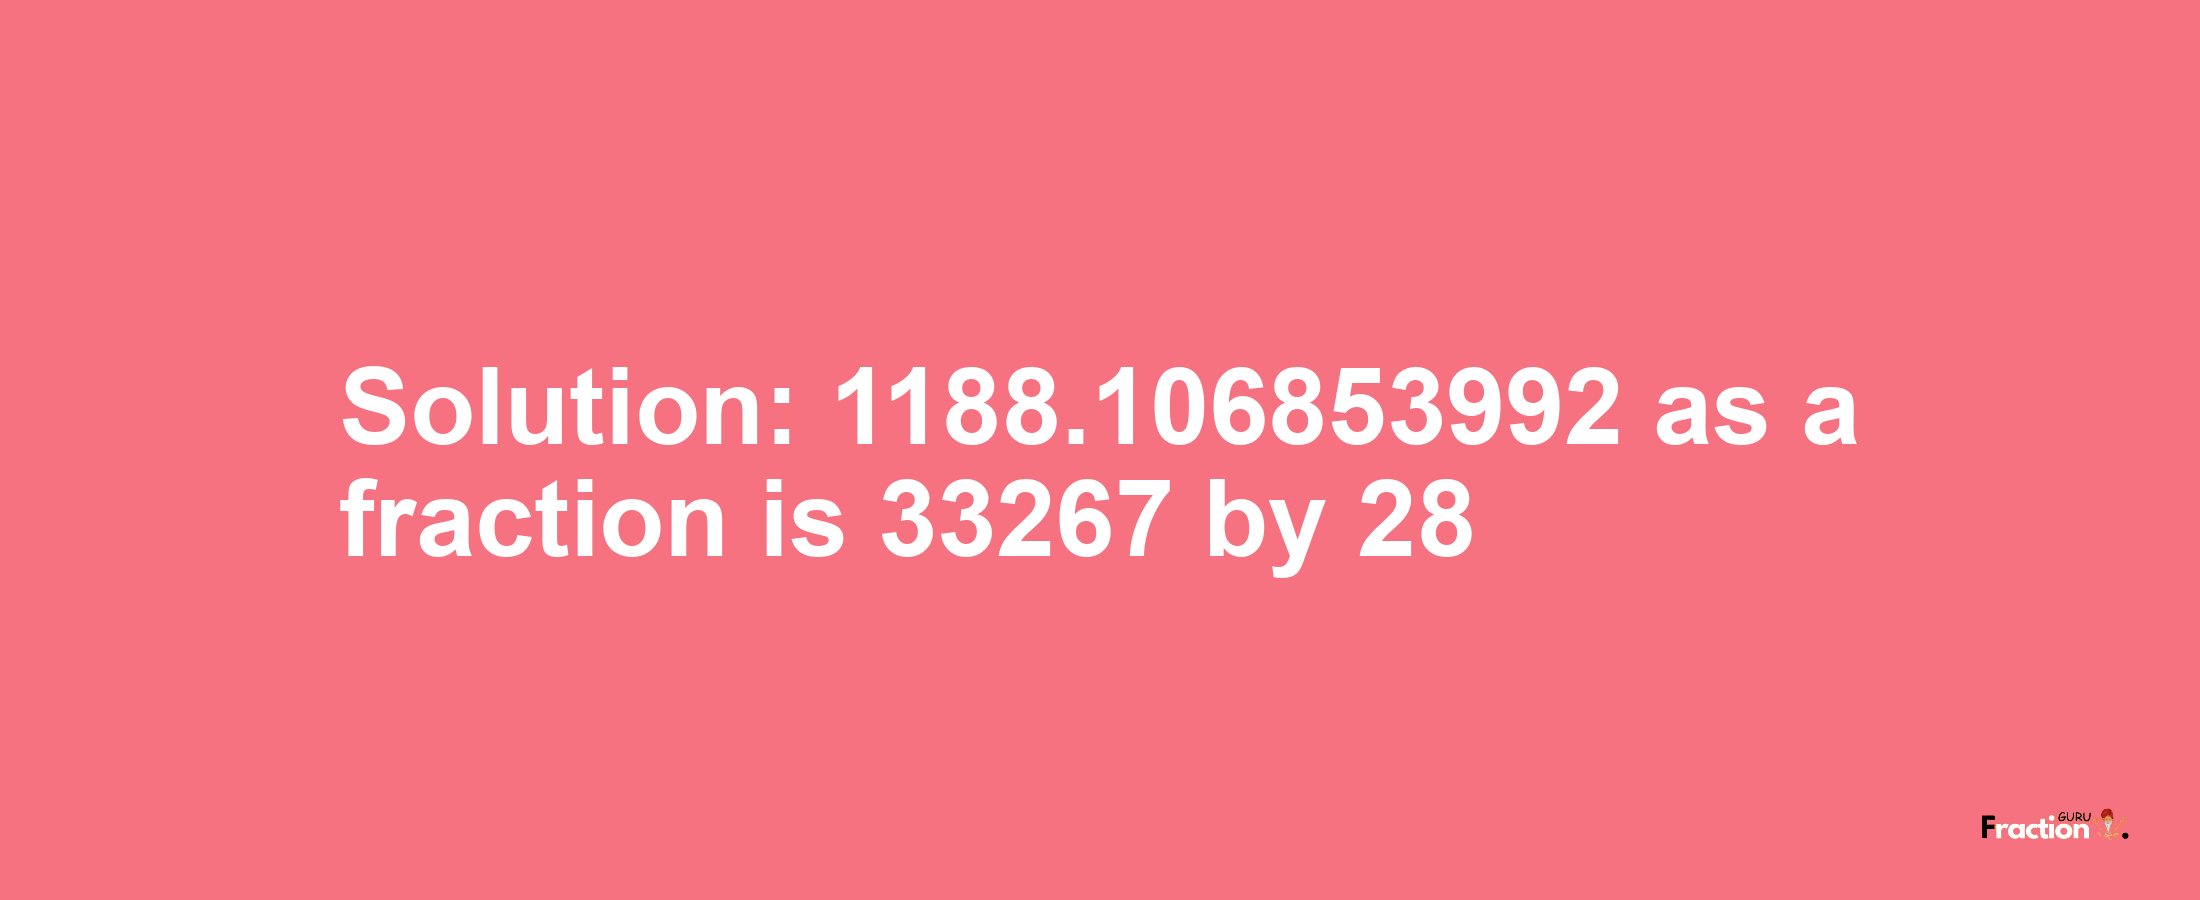 Solution:1188.106853992 as a fraction is 33267/28